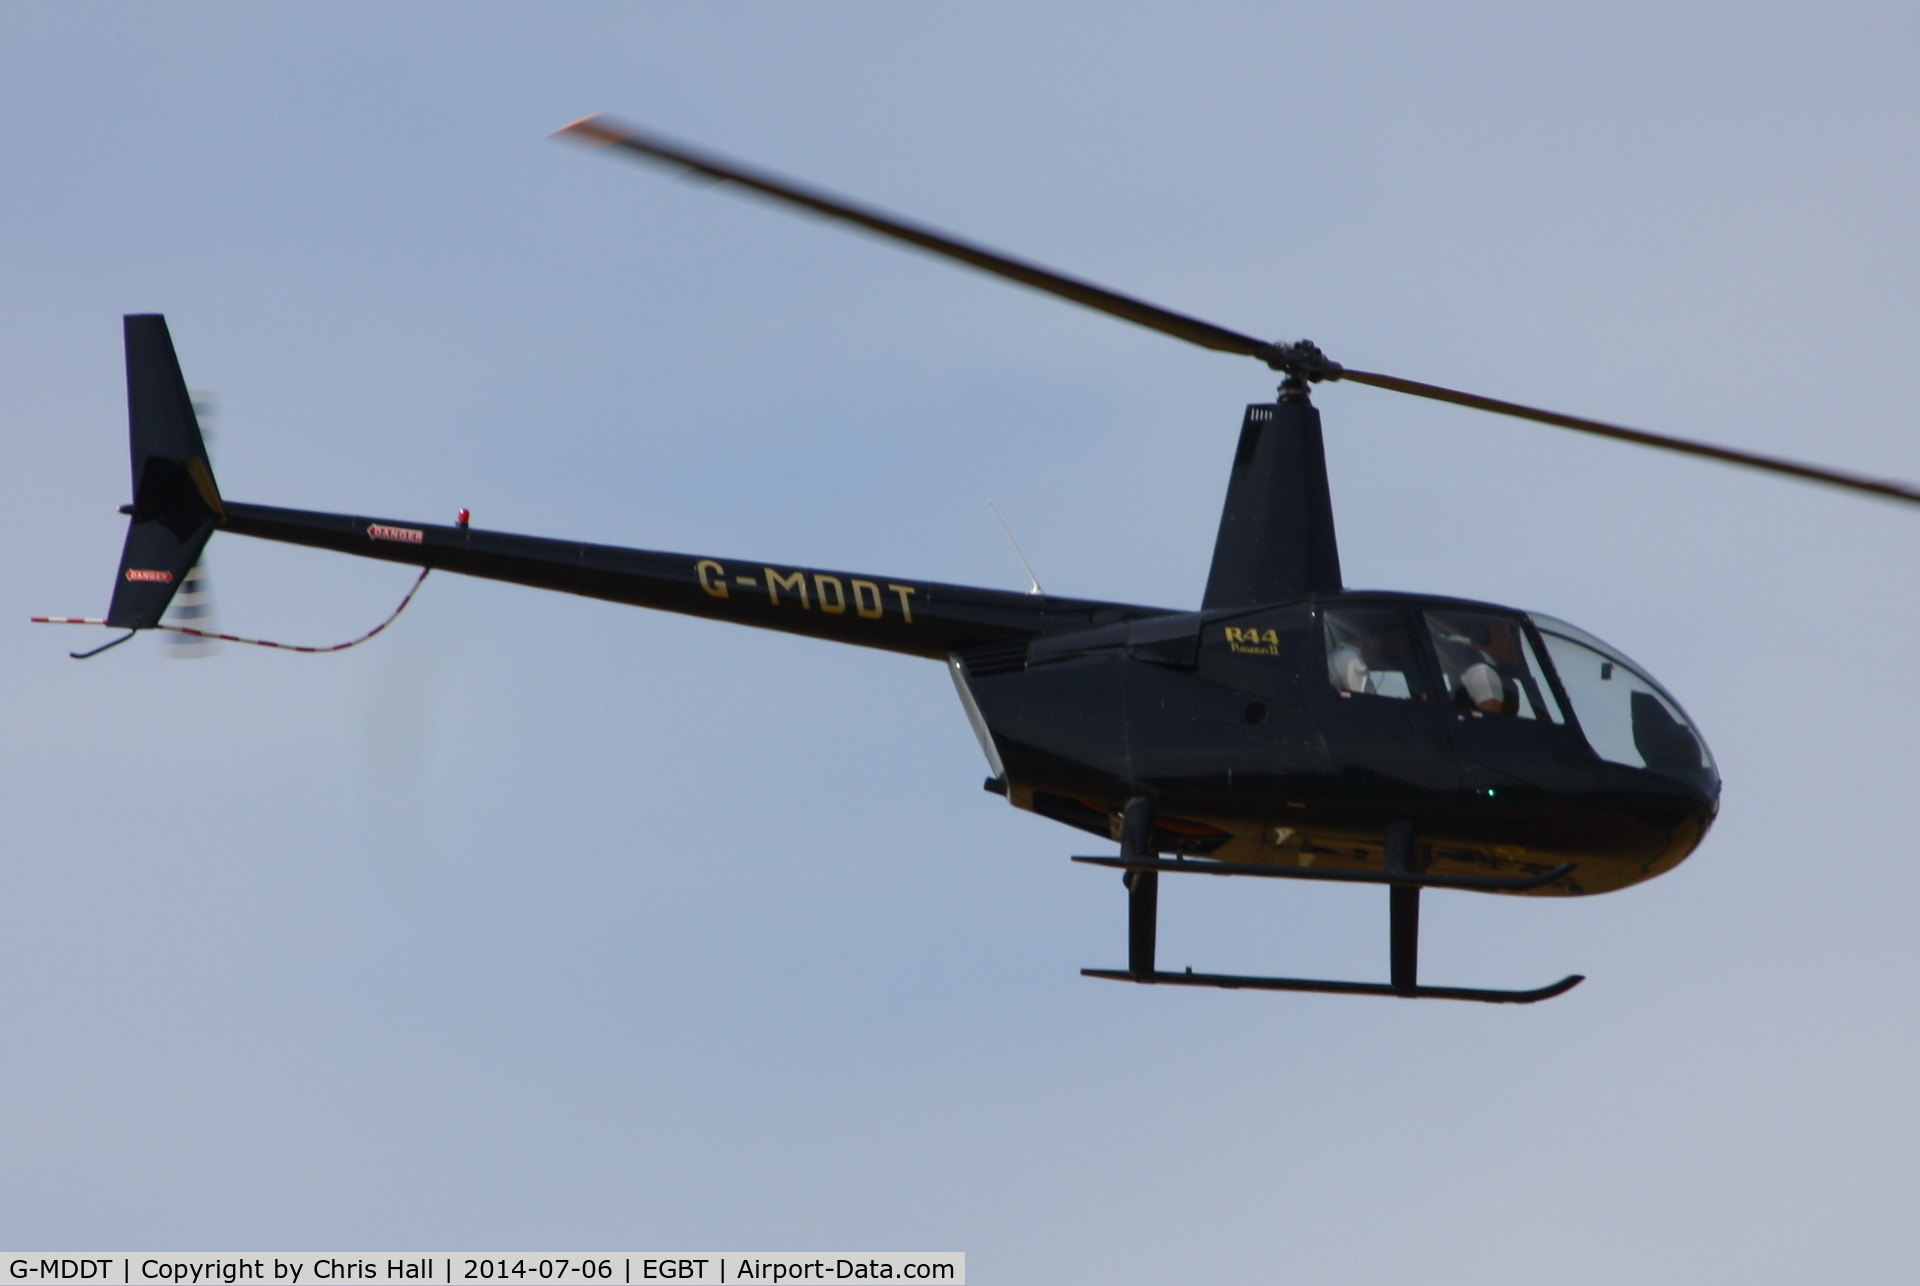 G-MDDT, 2006 Robinson R44 Raven II C/N 11474, being used for ferrying race fans to the British F1 Grand Prix at Silverstone